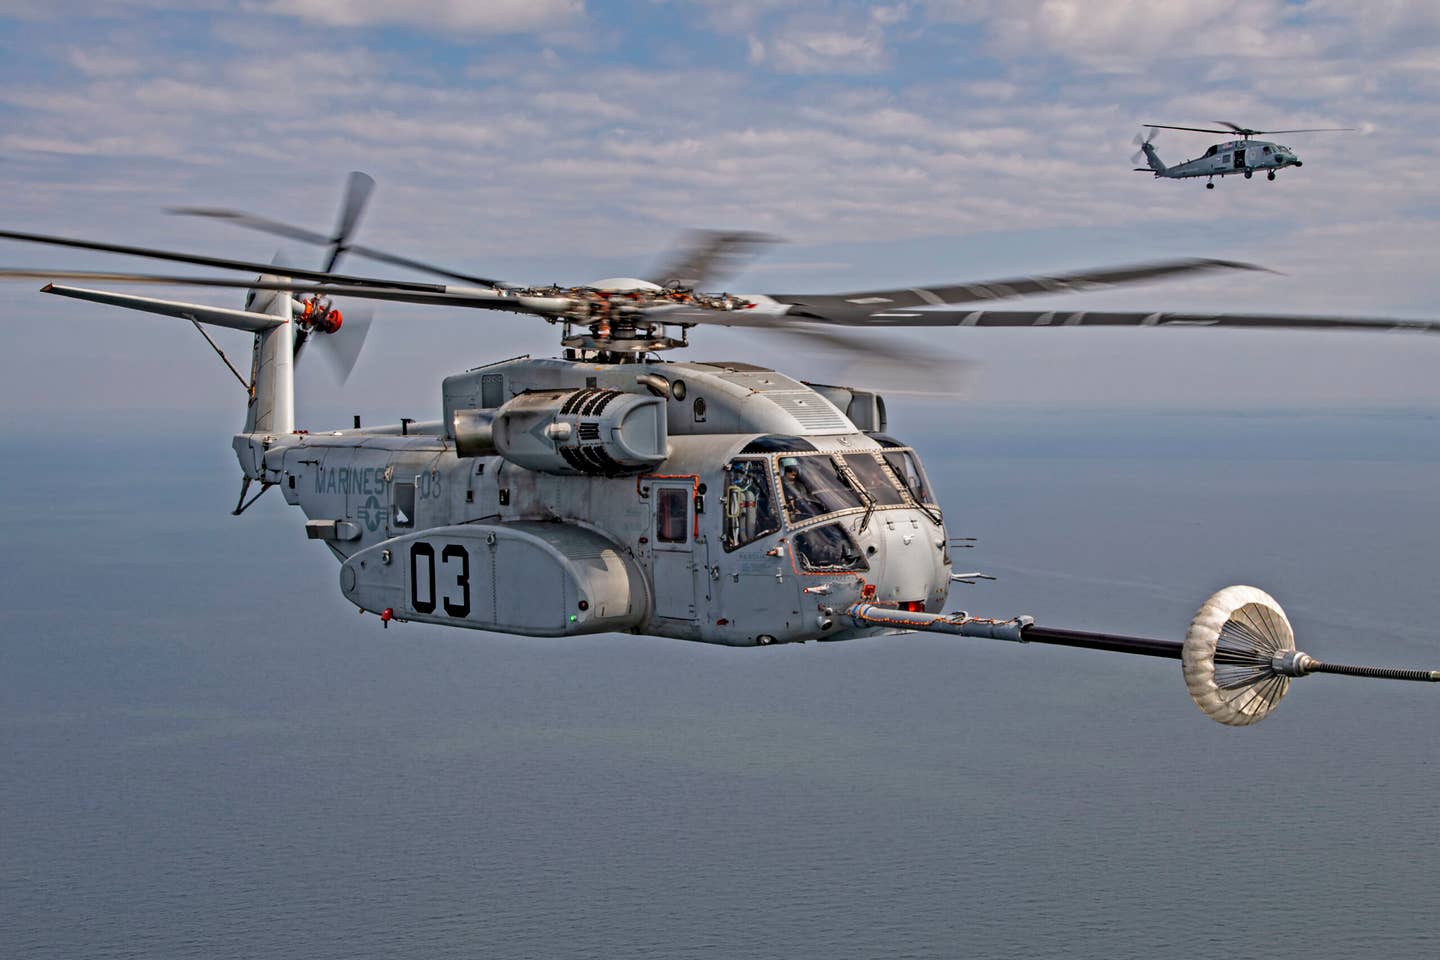 The CH-53K King Stallion successfully plugs into a funnel-shaped drogue towed behind a KC-130J during aerial refueling wake testing over the Chesapeake Bay. <em>Photo by Erik Hildebrandt</em>